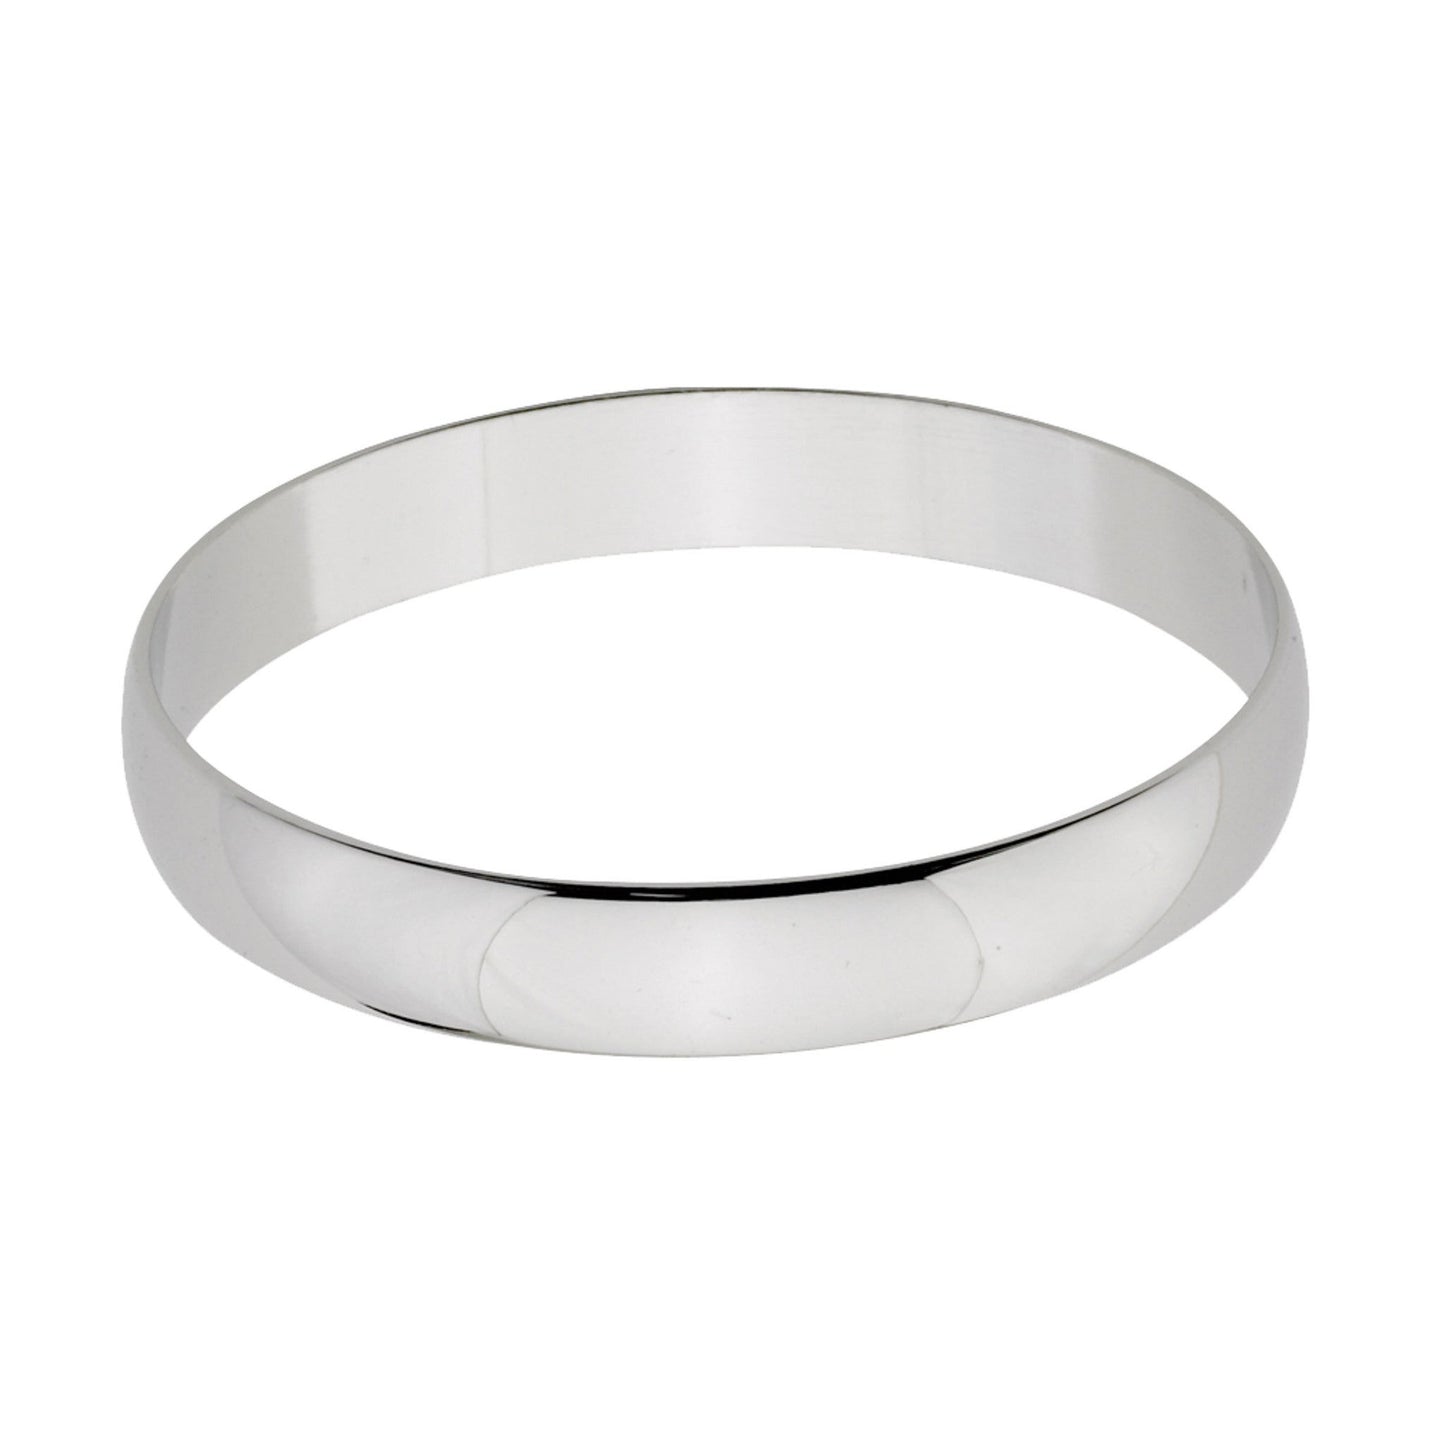 A child's engravable bangle bracelet displayed on a neutral white background.